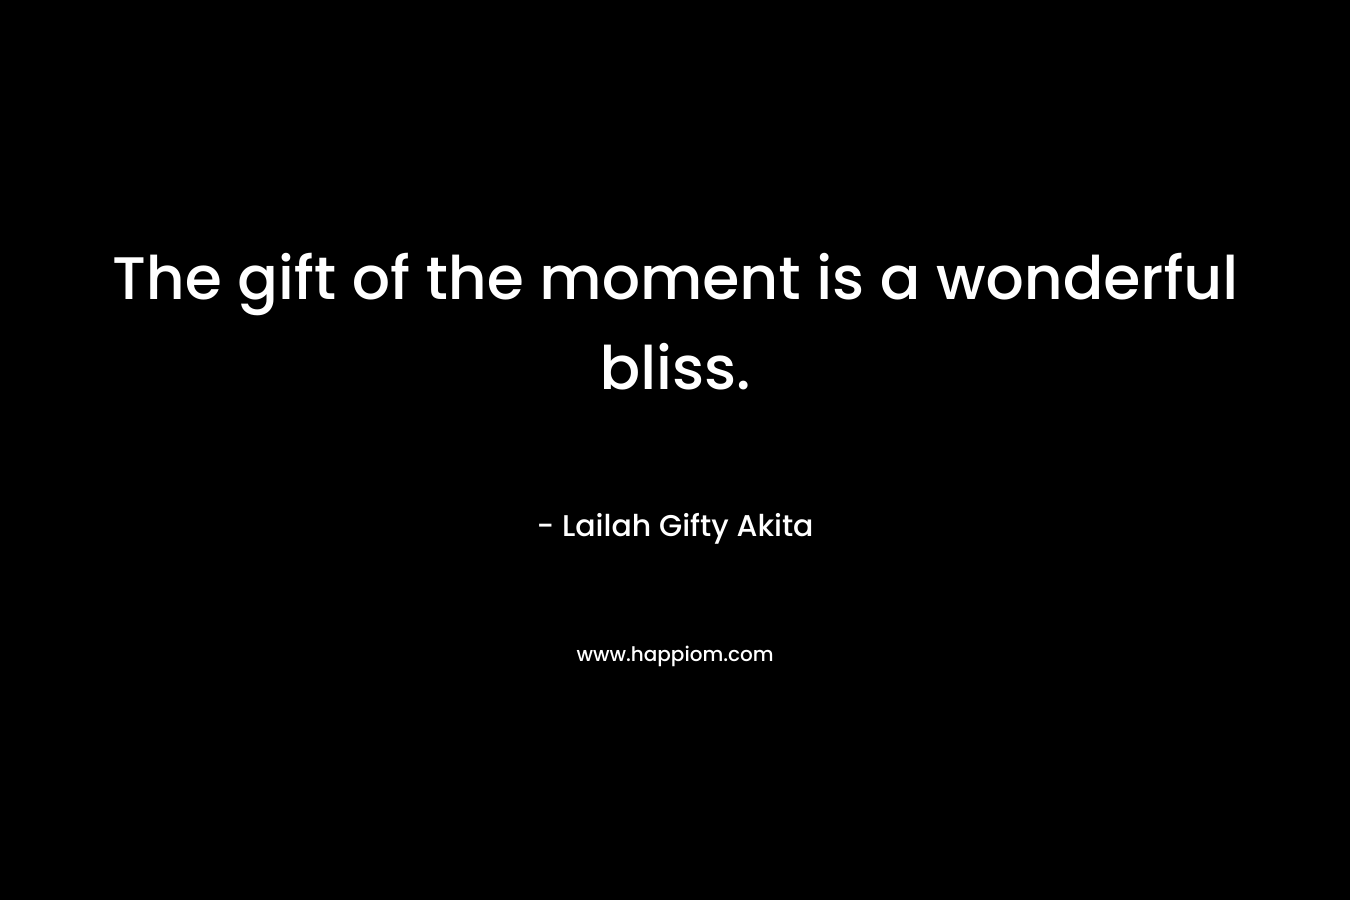 The gift of the moment is a wonderful bliss.